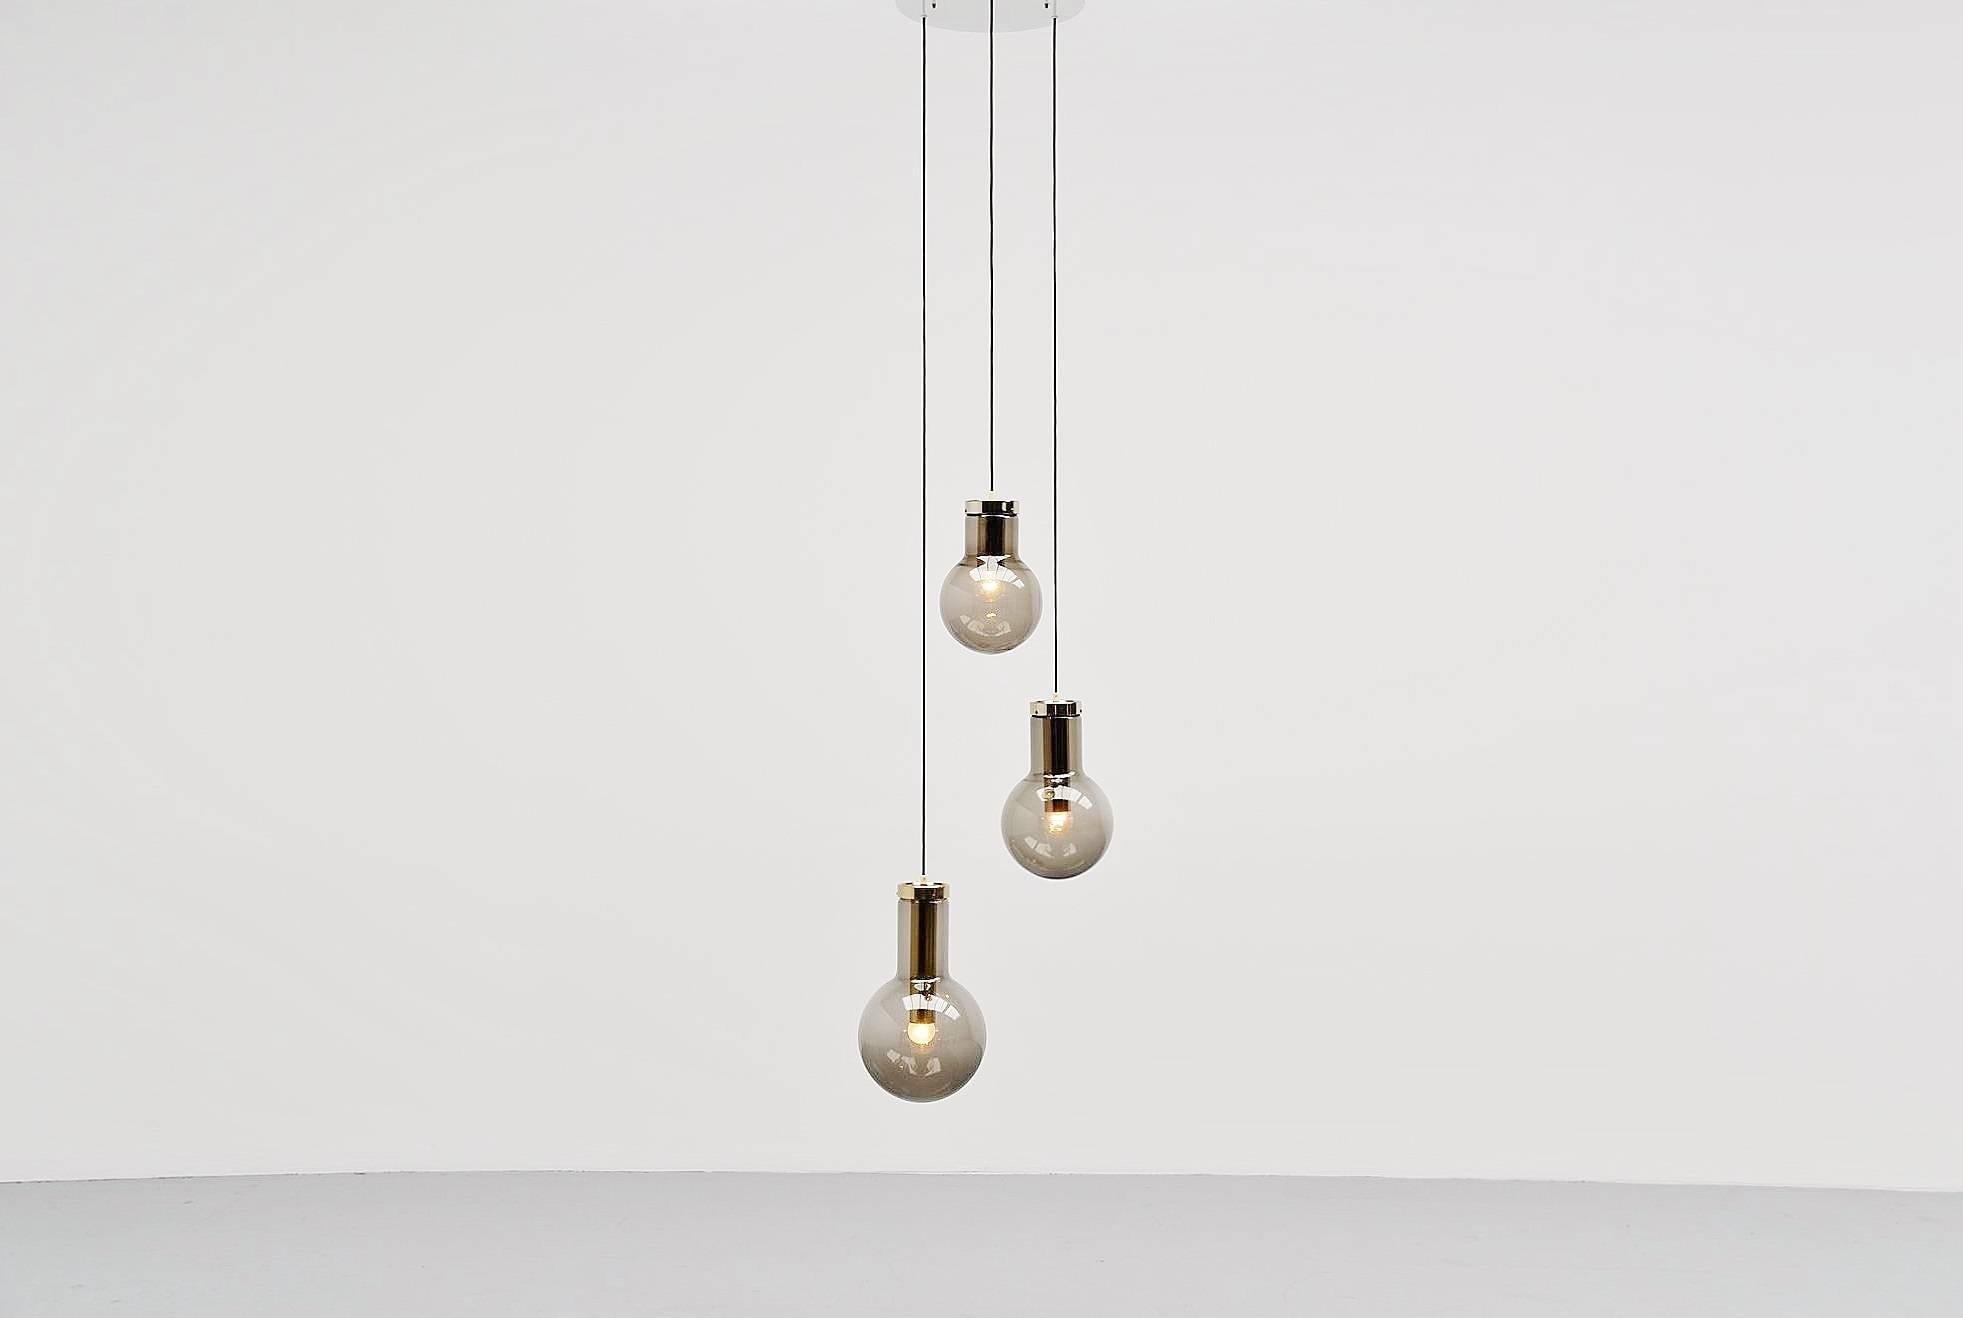 Very nice set of three pendant lamps designed and made by RAAK Amsterdam, Holland, 1965. These lamps are called maxi globes and this is a set of all three different sizes. The lamps have brown fume glass and a brass fixture. We can make two similar